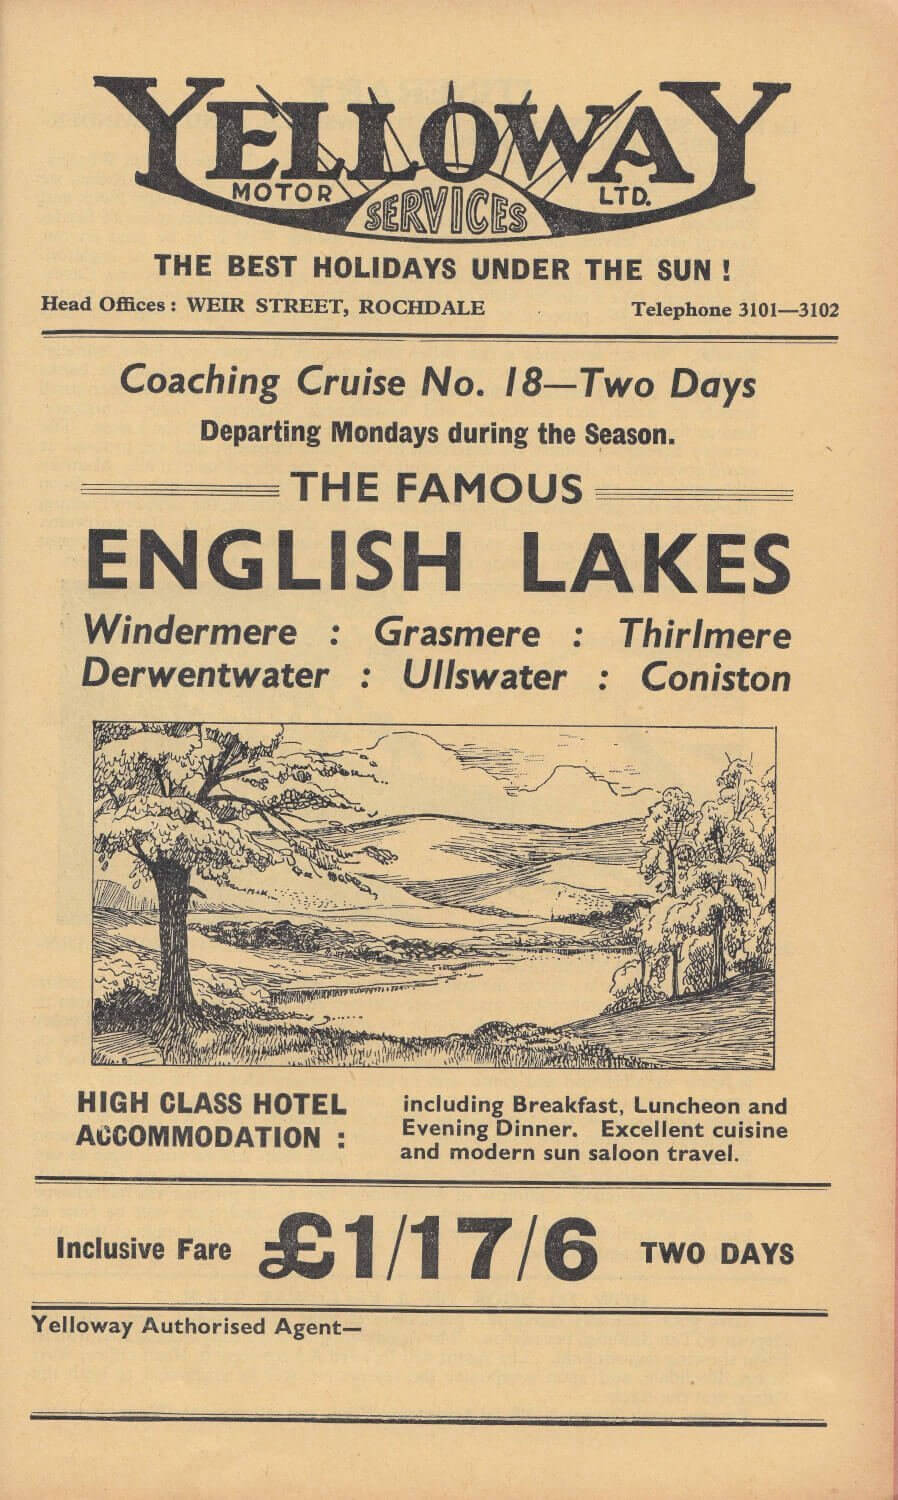 A cheaper option for travellers was a two day Coaching Cruise of the English Lakes for £1.17s.6d. Dave Haddock Collection-min